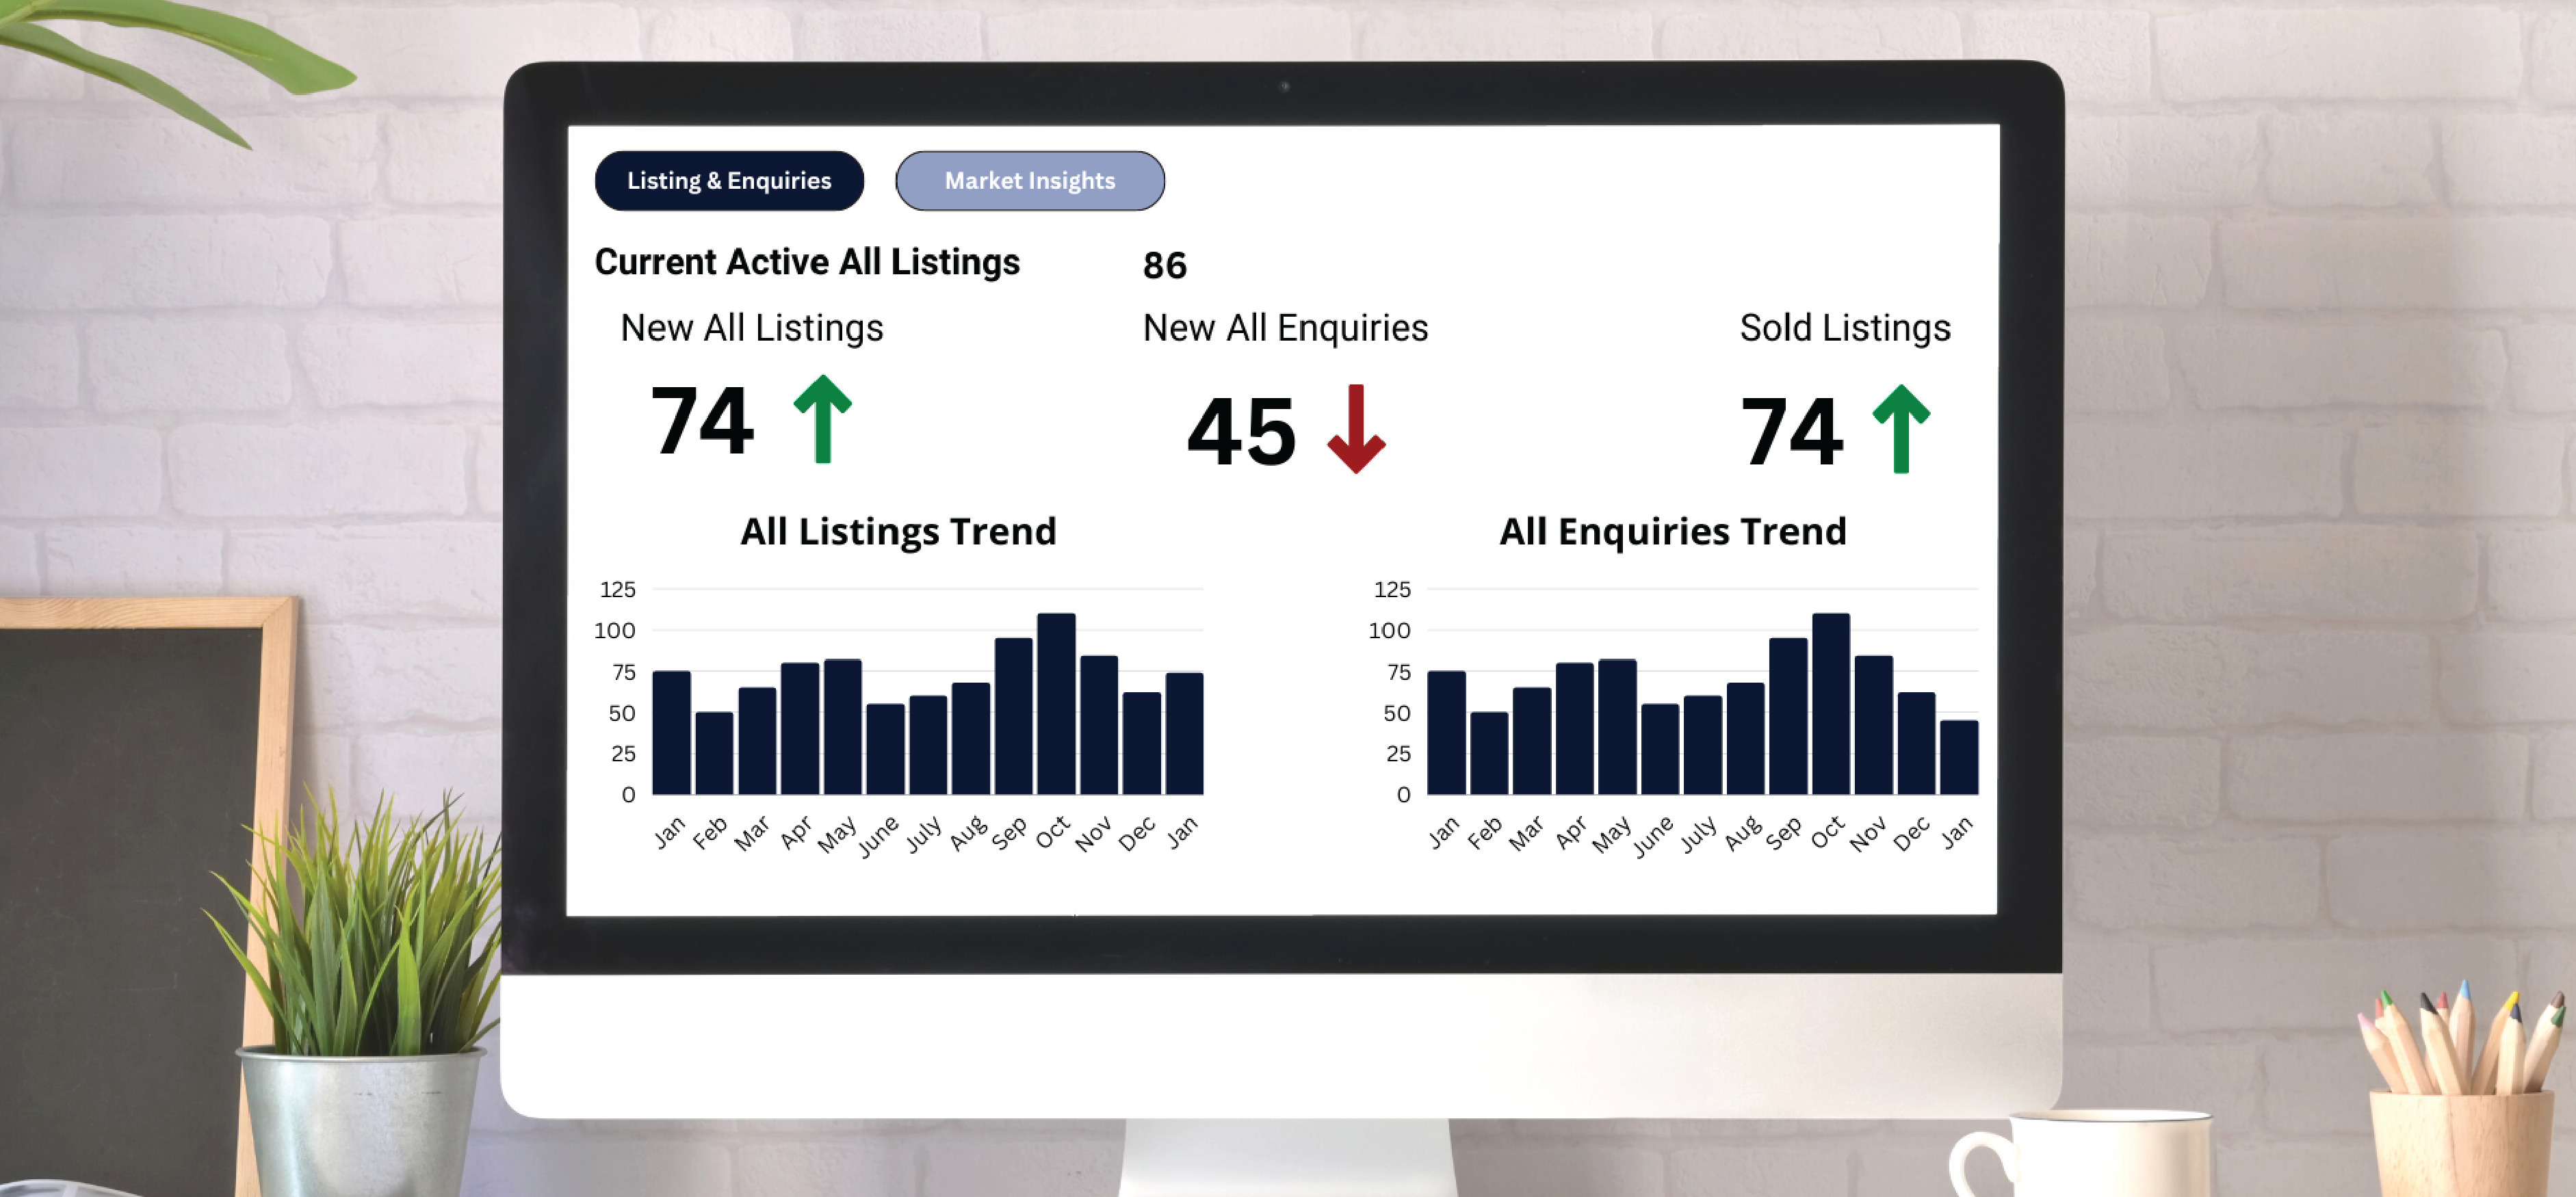 Tracking Real Estate Performance Metrics Efficiently